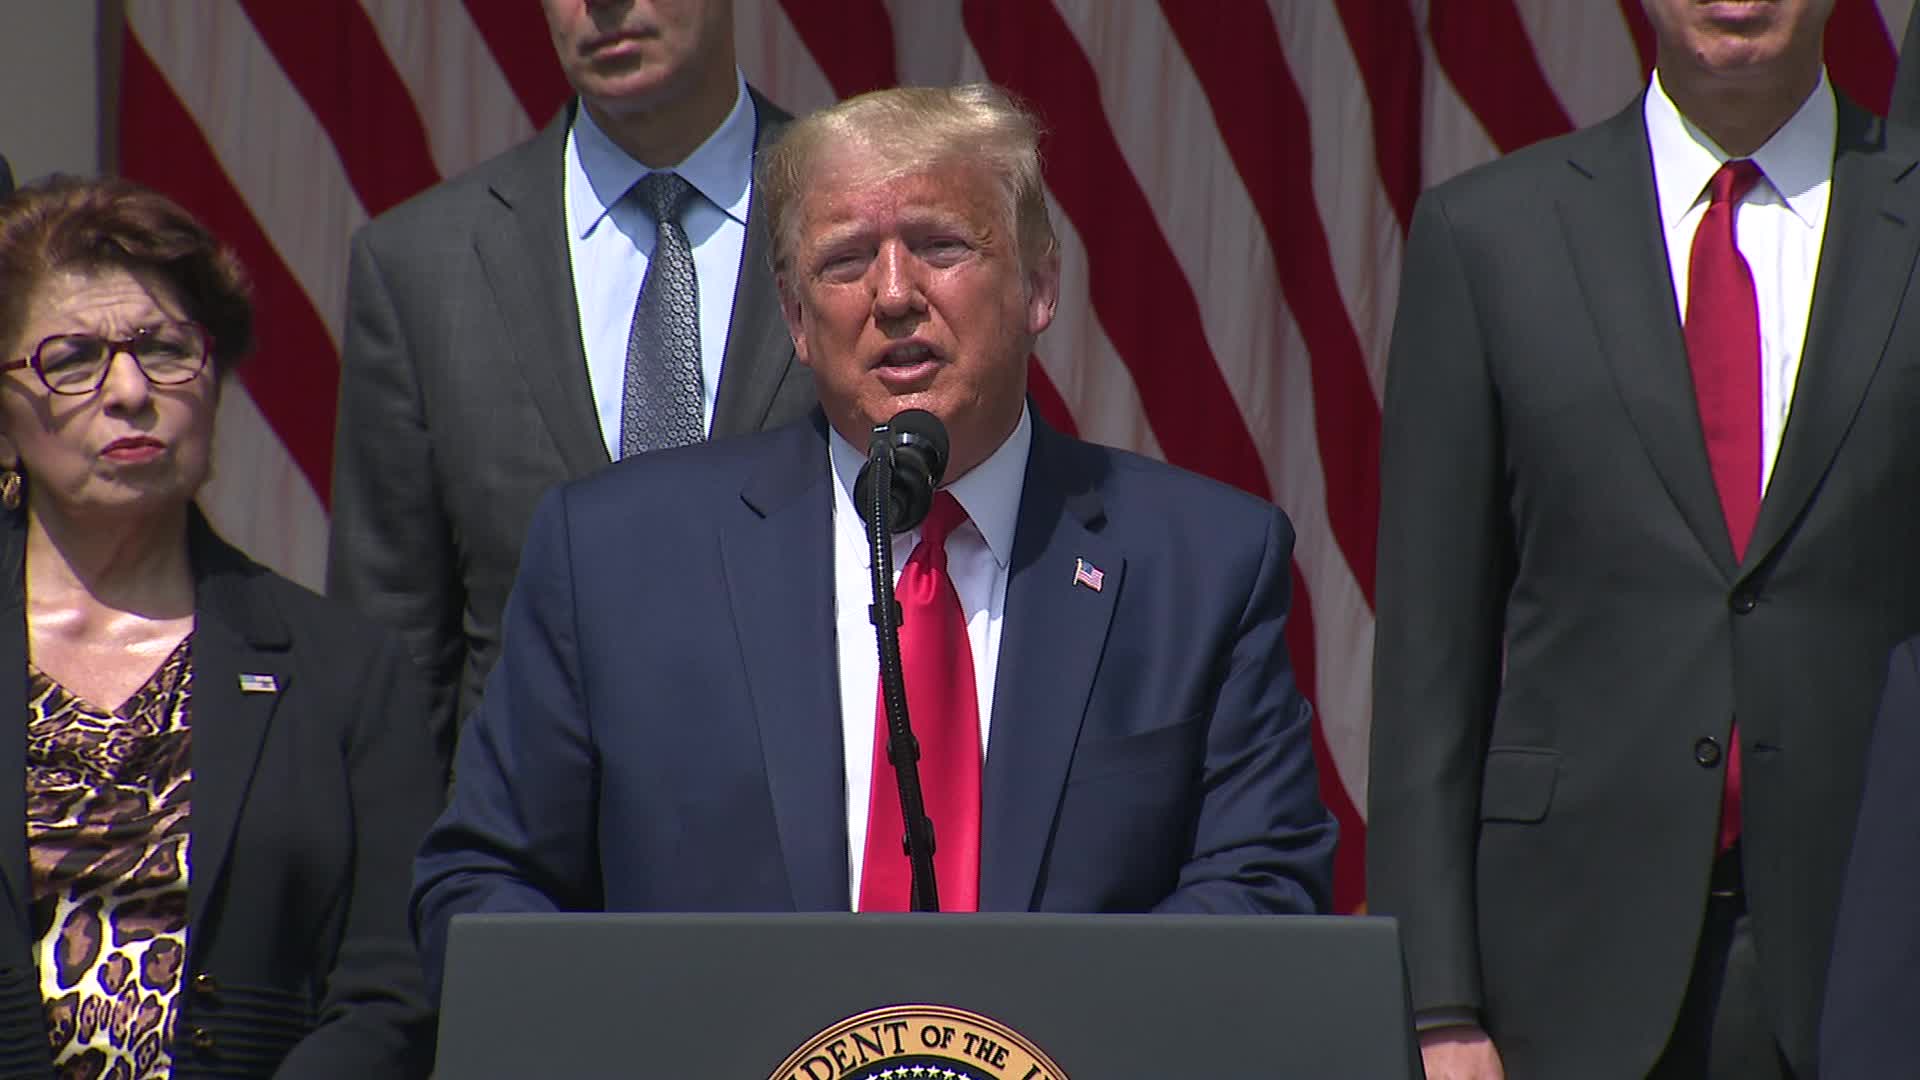 President Trump speaks at a press conference at the White House in Washington on June 5.